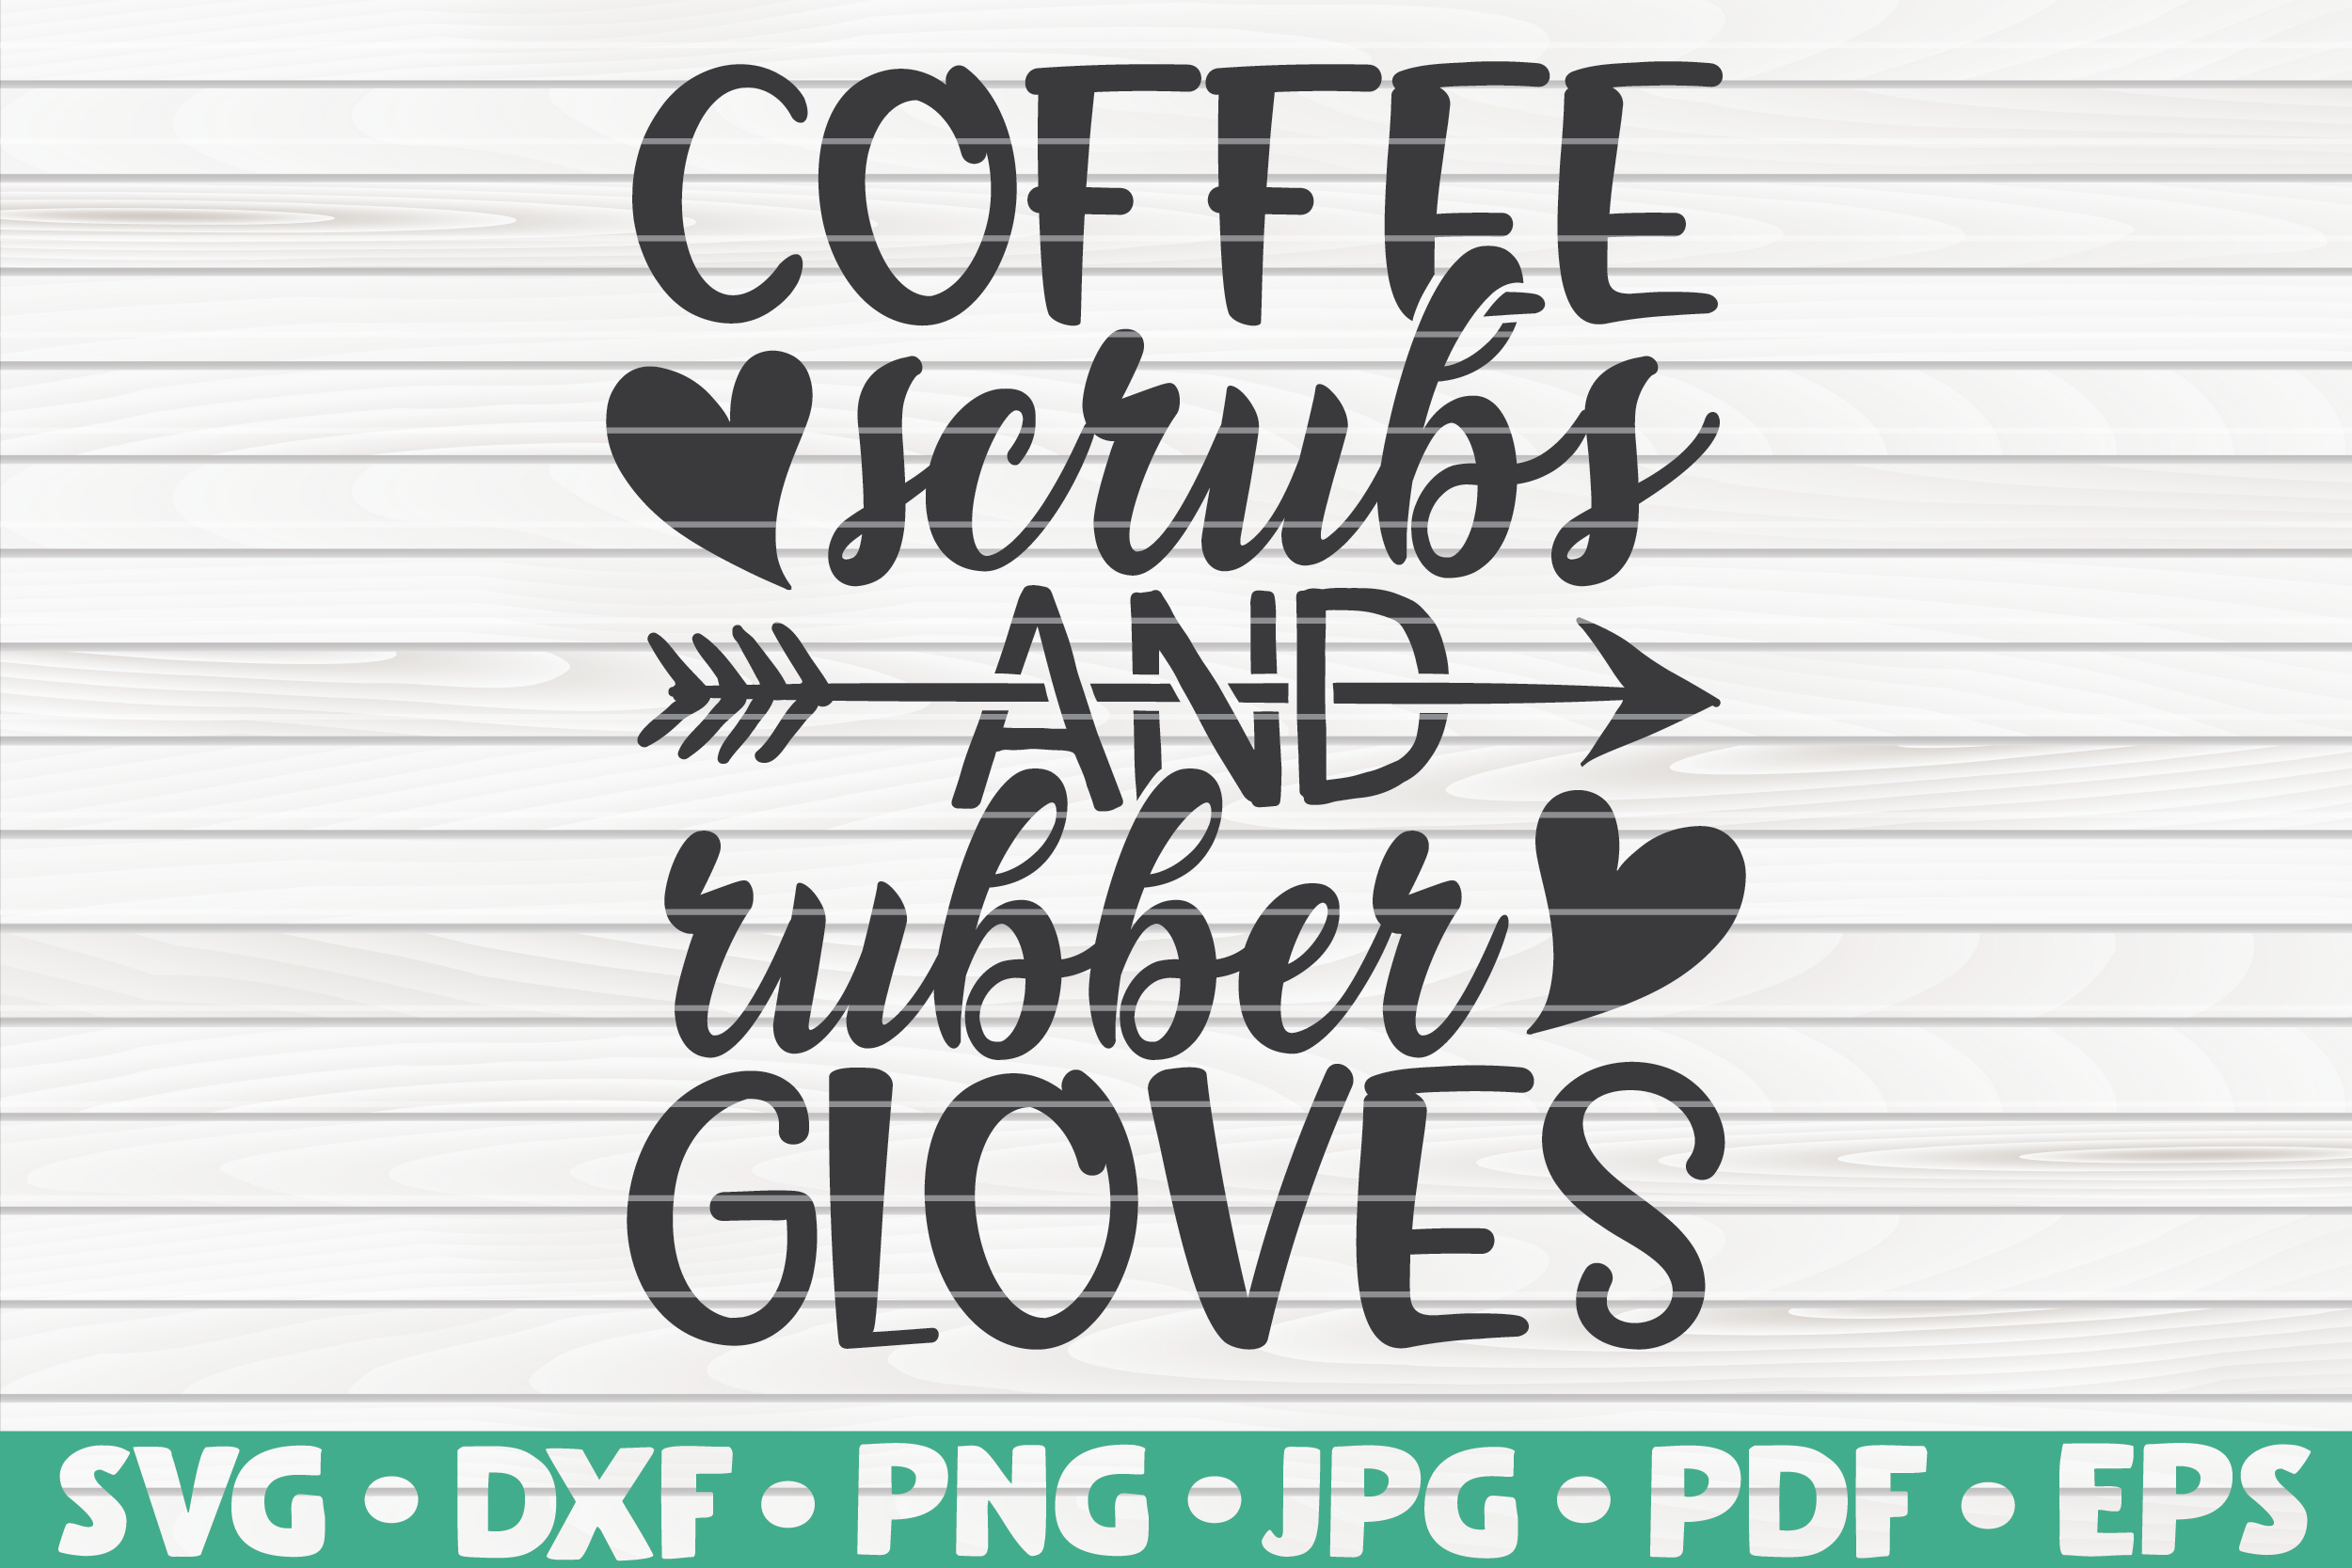 Download Coffee Scrubs And Rubber Gloves Svg Nurse Life By Hqdigitalart Thehungryjpeg Com